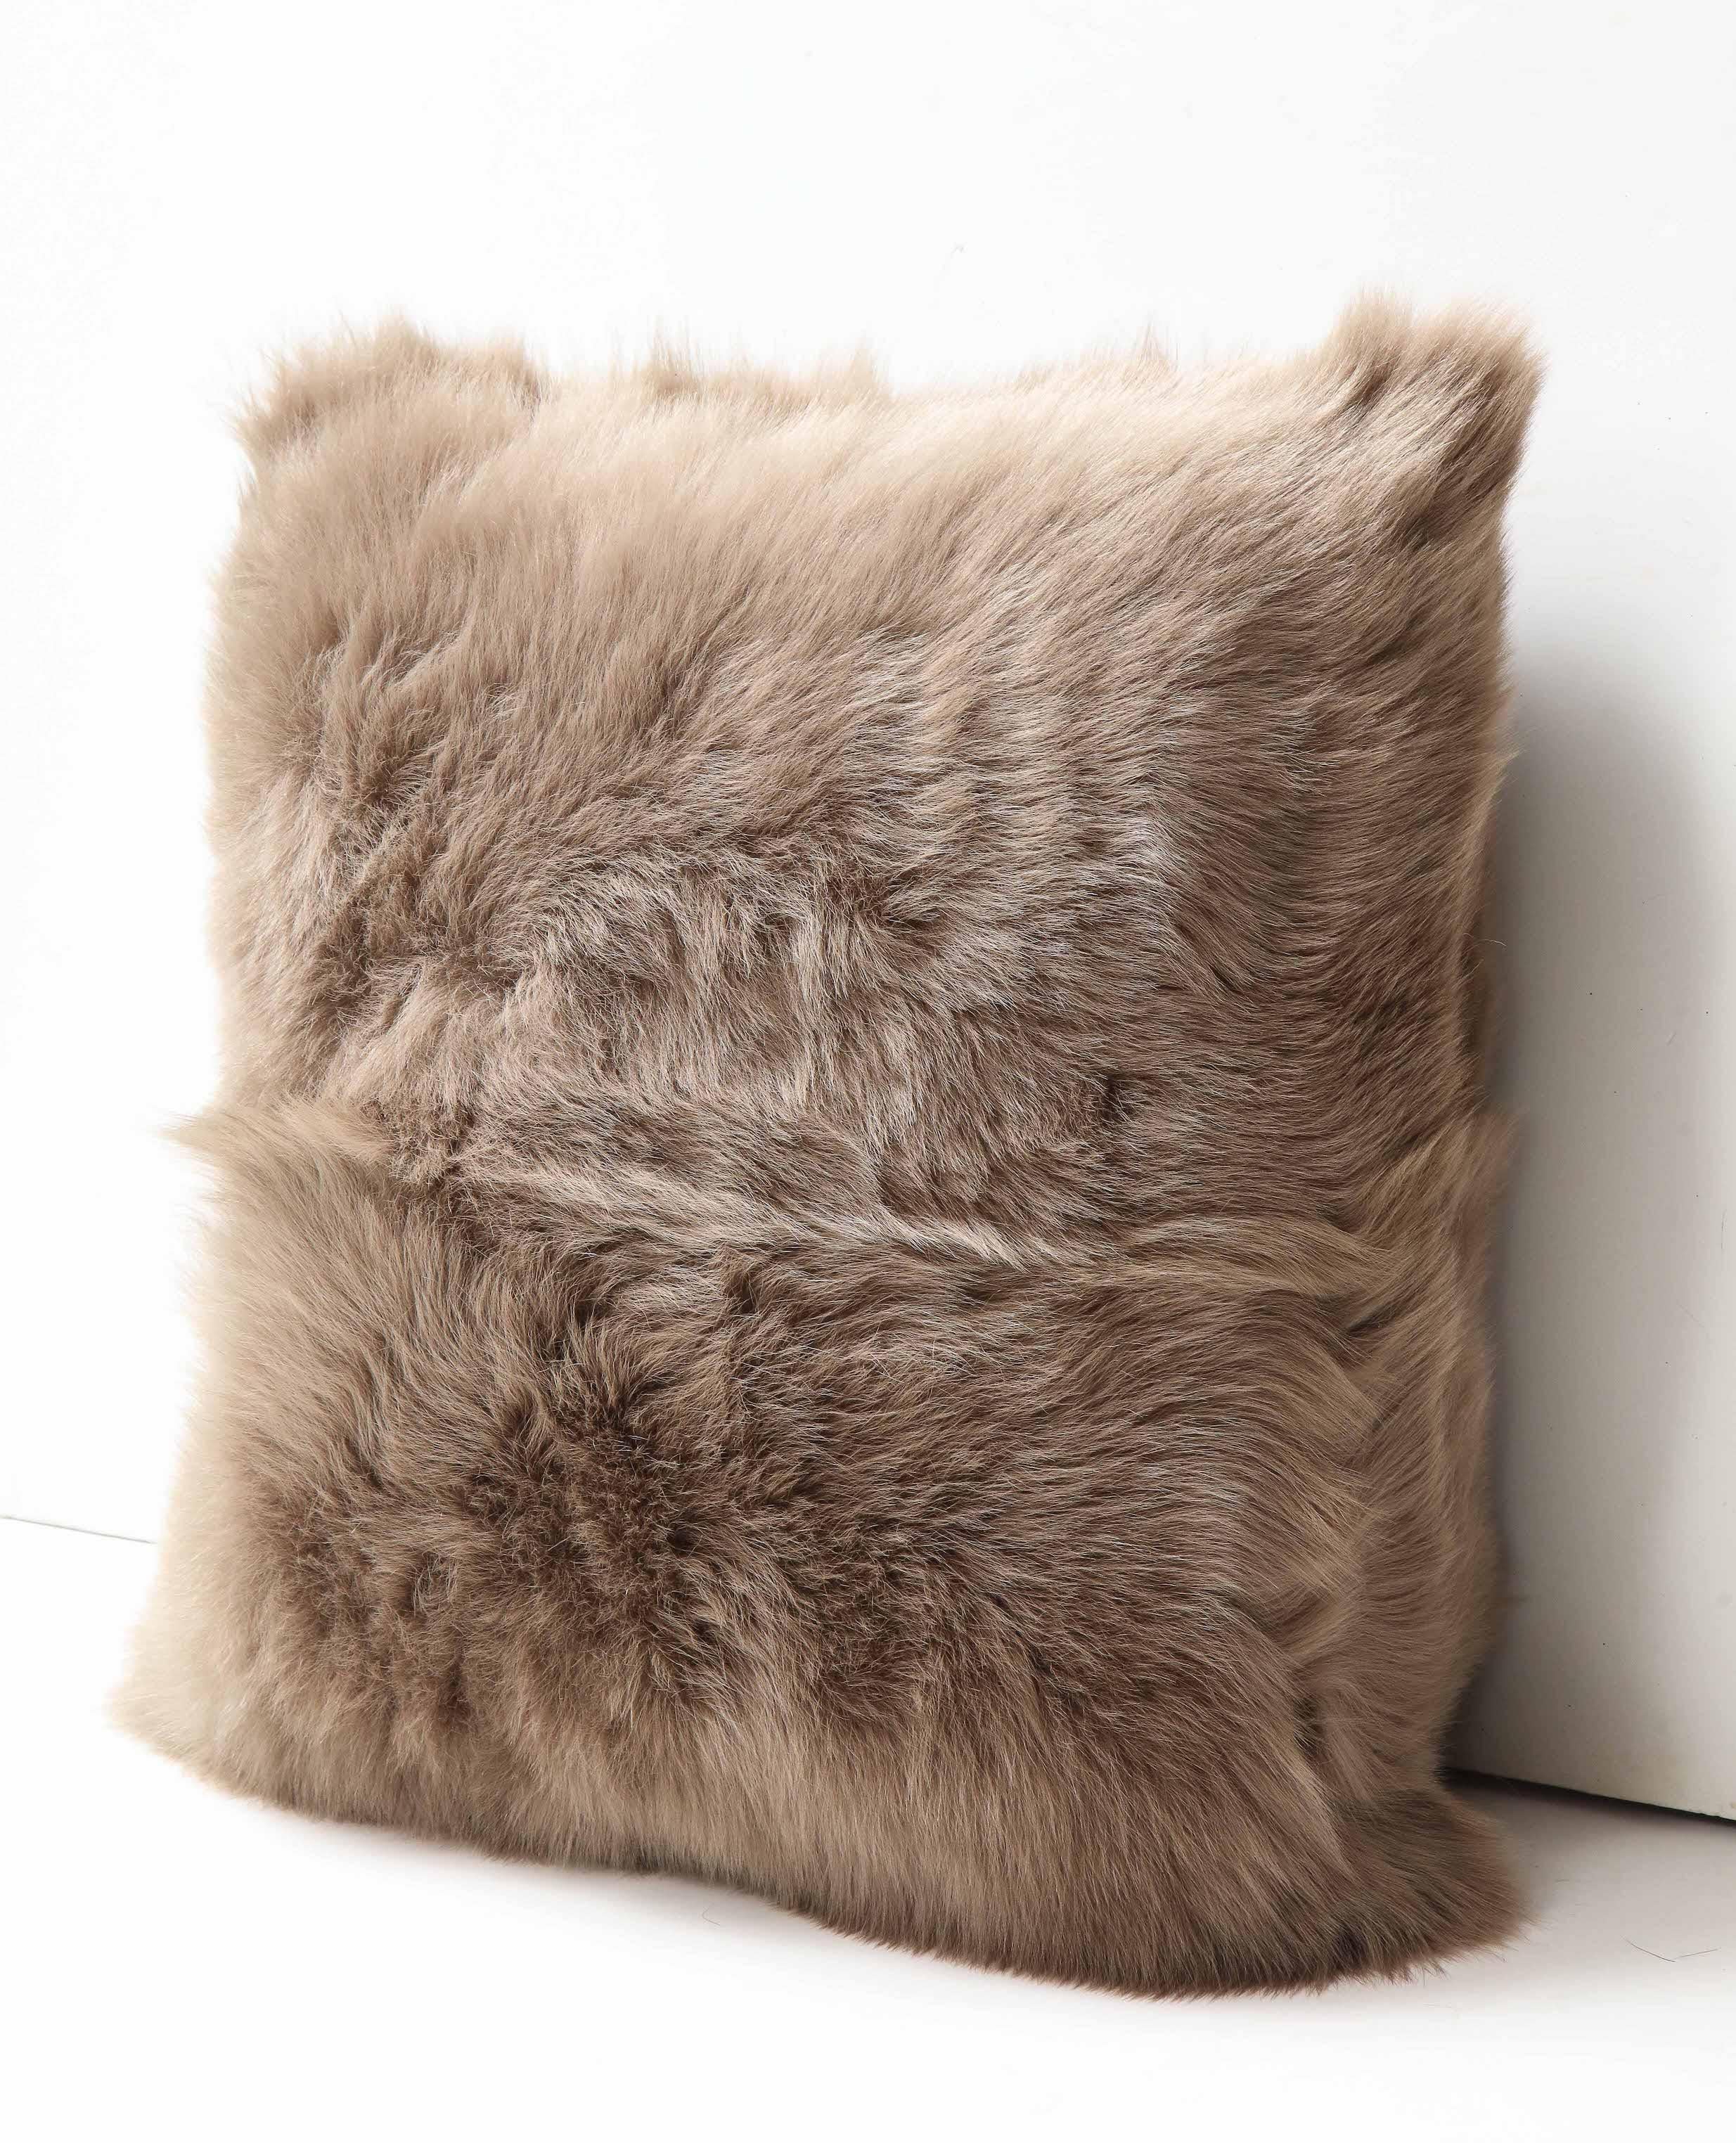 Beautiful double sided long hair Toscana shearing pillow in taupe color. Very elegant in look and tangibly luxurious and soft. It is made of genuine shearing with a zipper enclosure in a matching color, filled with down and feather, and 18